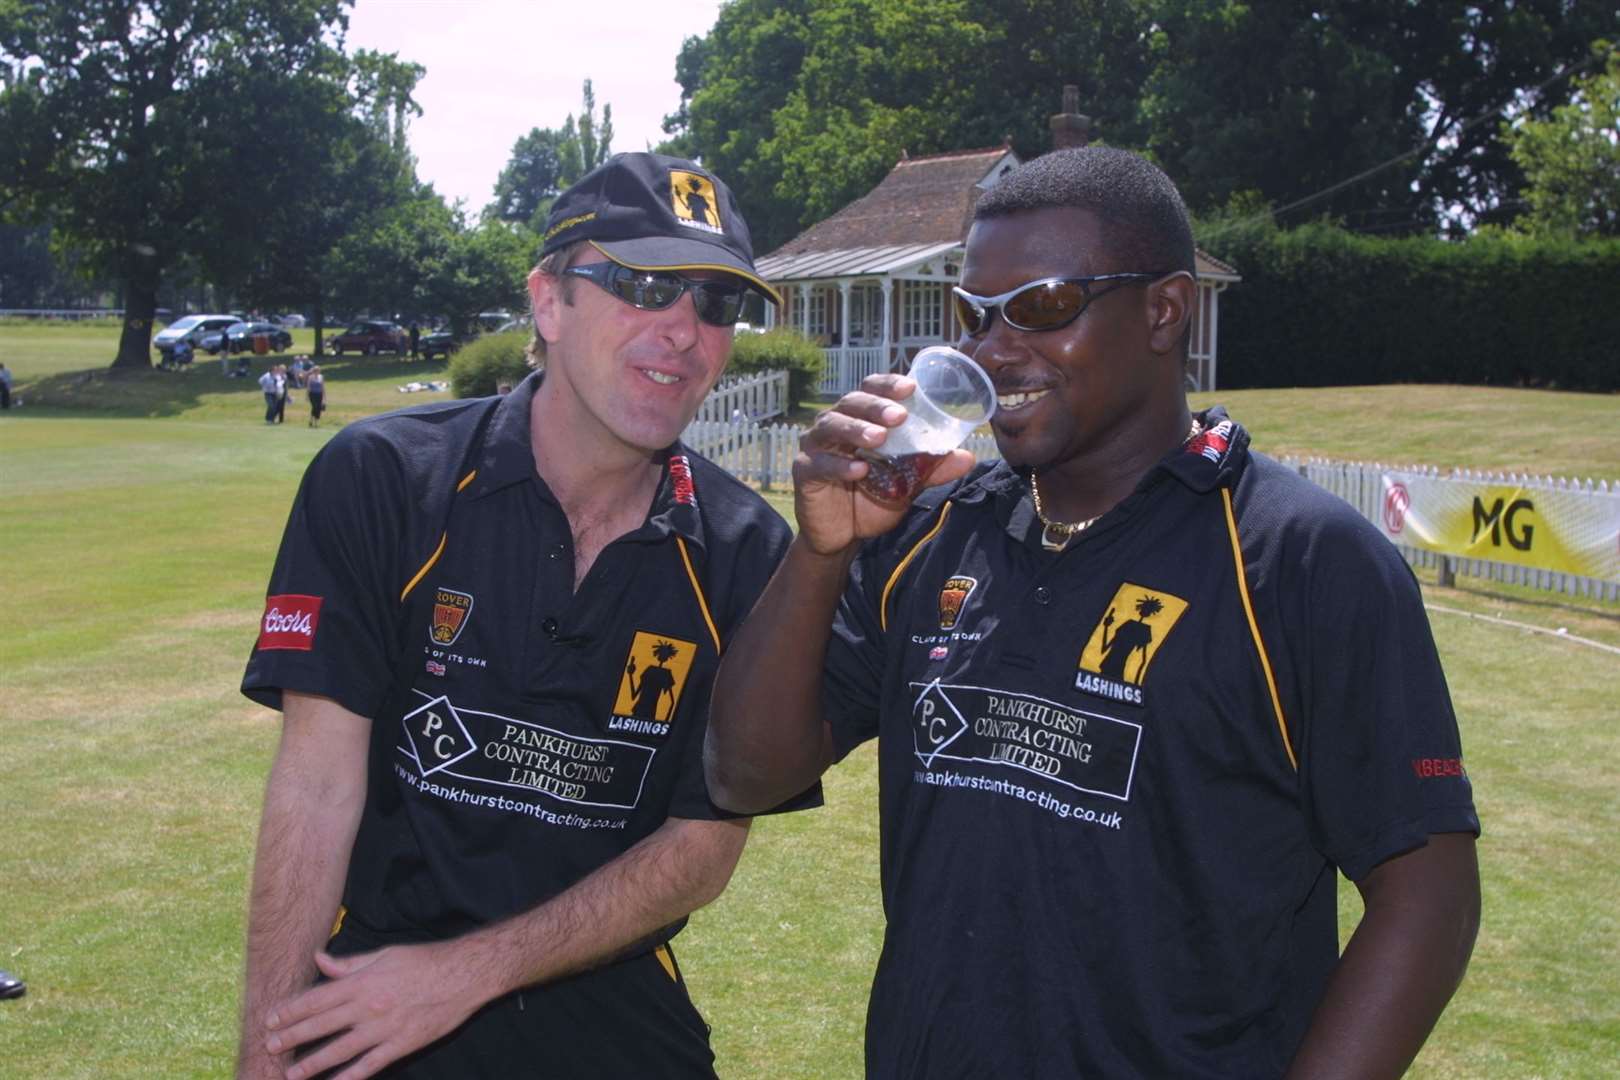 Phil Tufnell and Richie Richardson have a laugh at a cricket match between Lashings and Cambridge at Mote Park in Maidstone in 2003